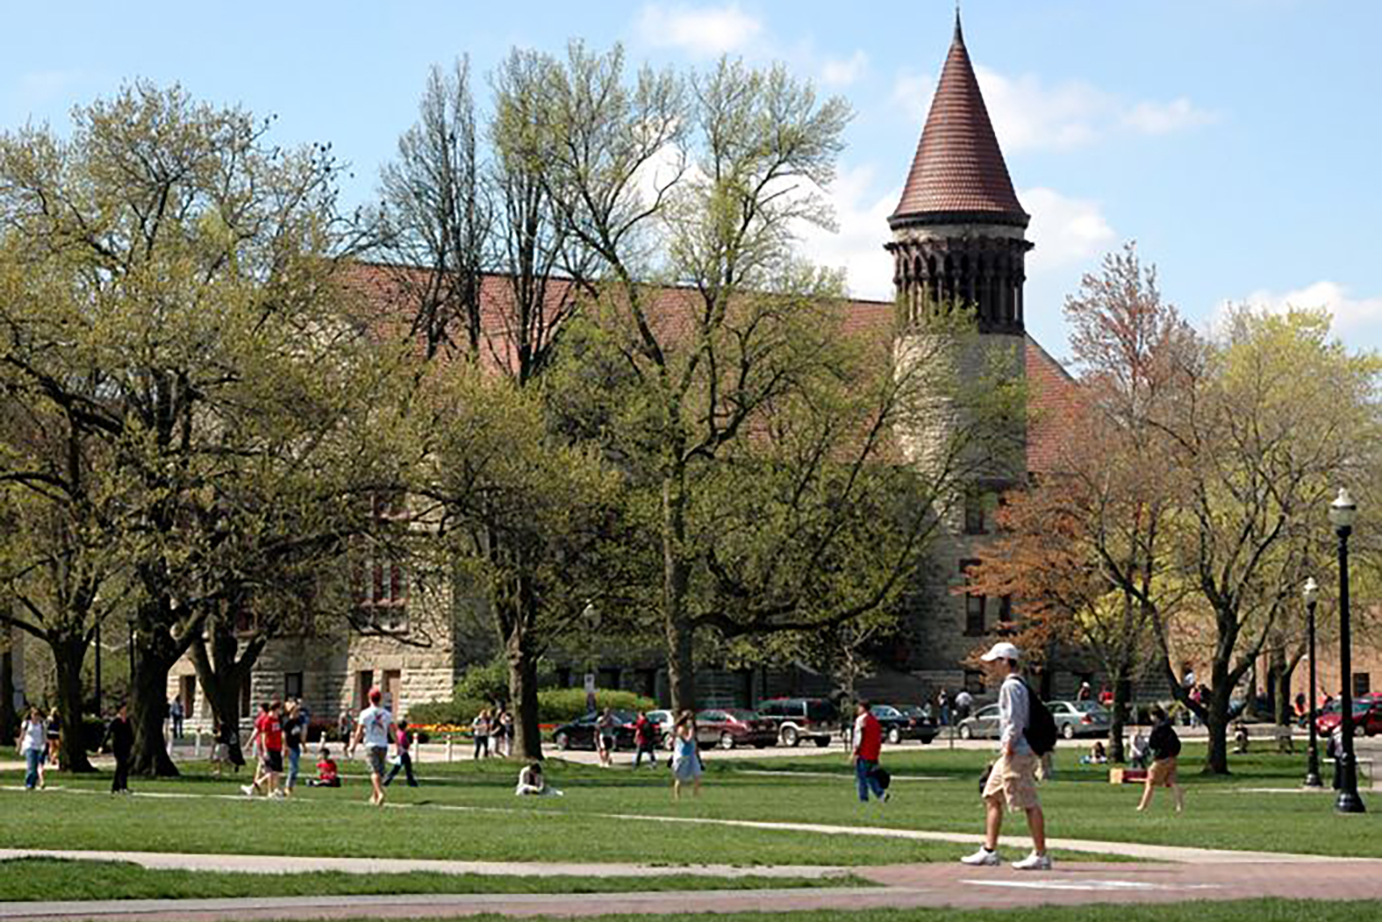 Students walking across the Oval at Ohio State